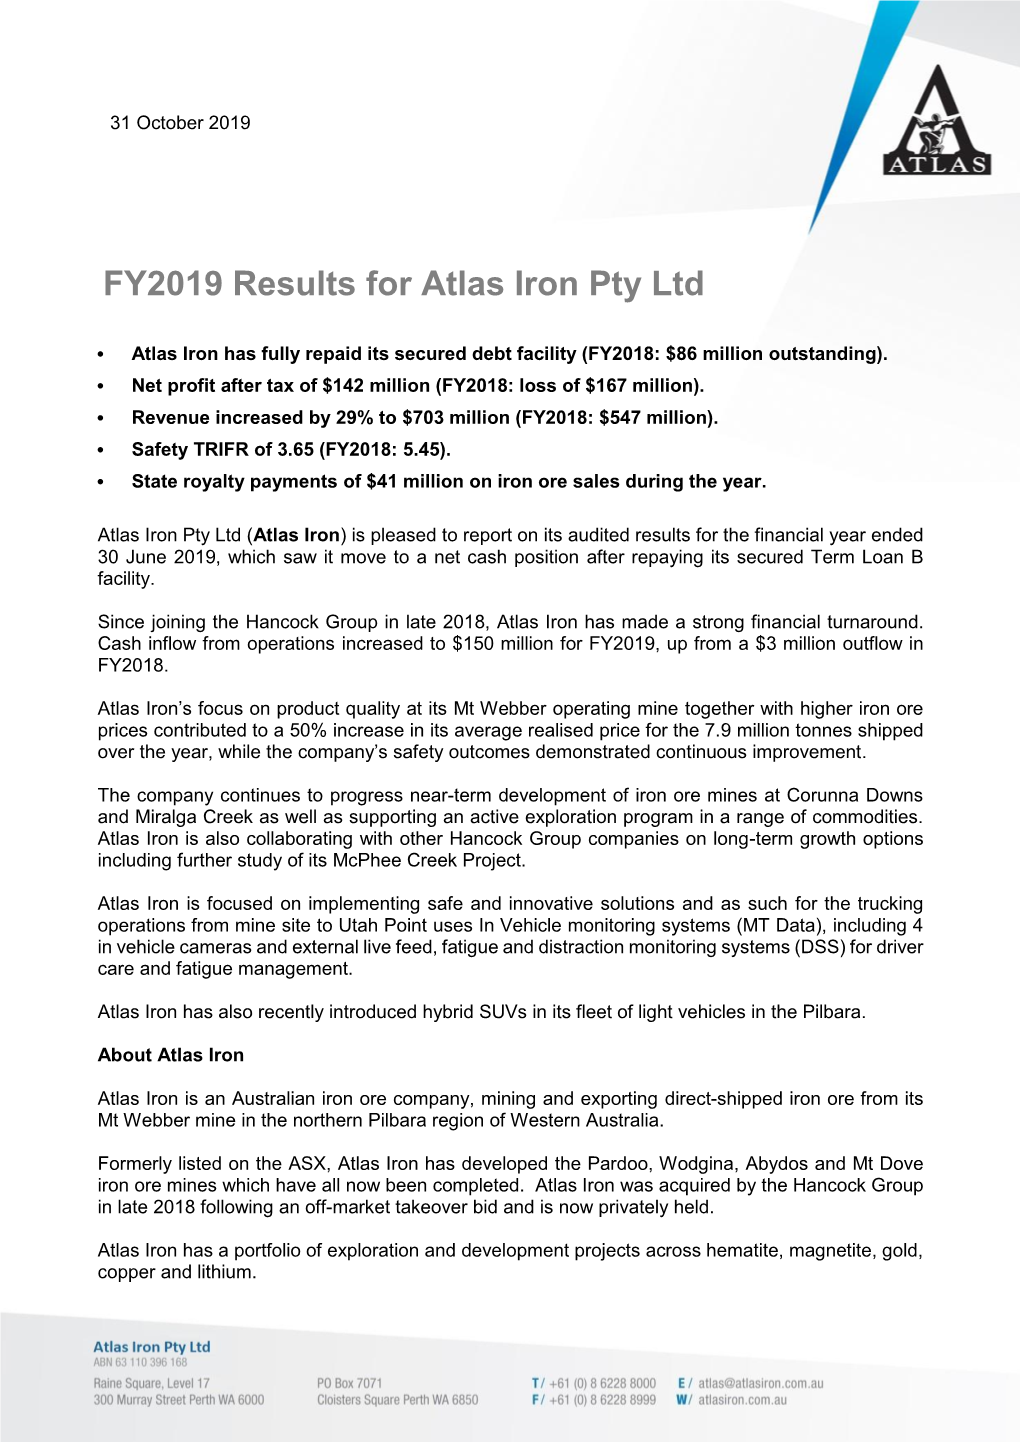 FY2019 Results for Atlas Iron Pty Ltd